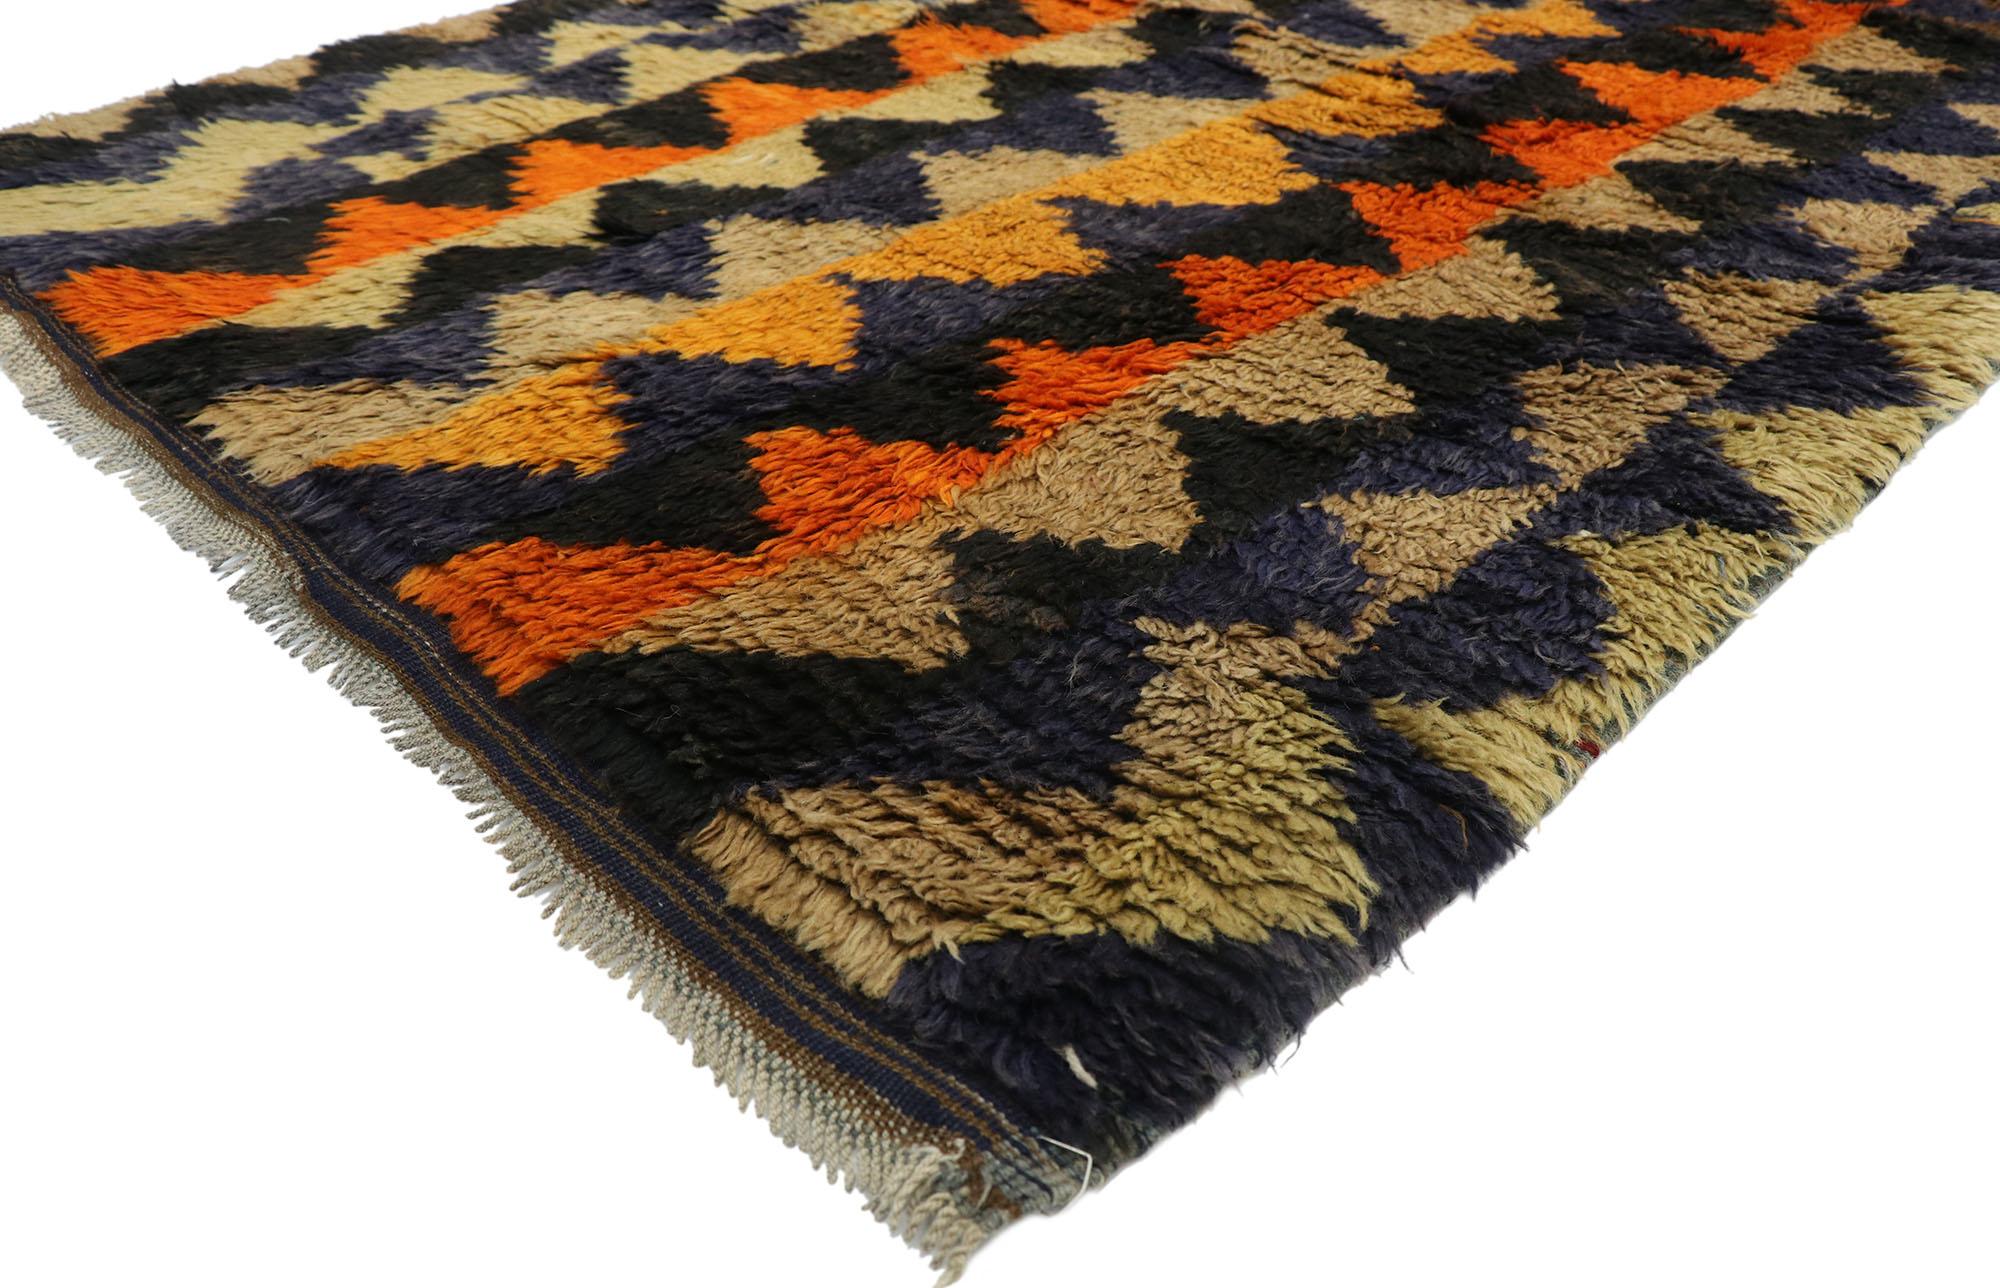 52712, vintage Turkish Tulu rug with Bold Art Deco style. With a bold geometric form, Art Deco style, and retro flair, this hand knotted wool vintage Turkish Tulu rug astounds with its beauty. Bold colors and plush pile bring harmony to this vintage